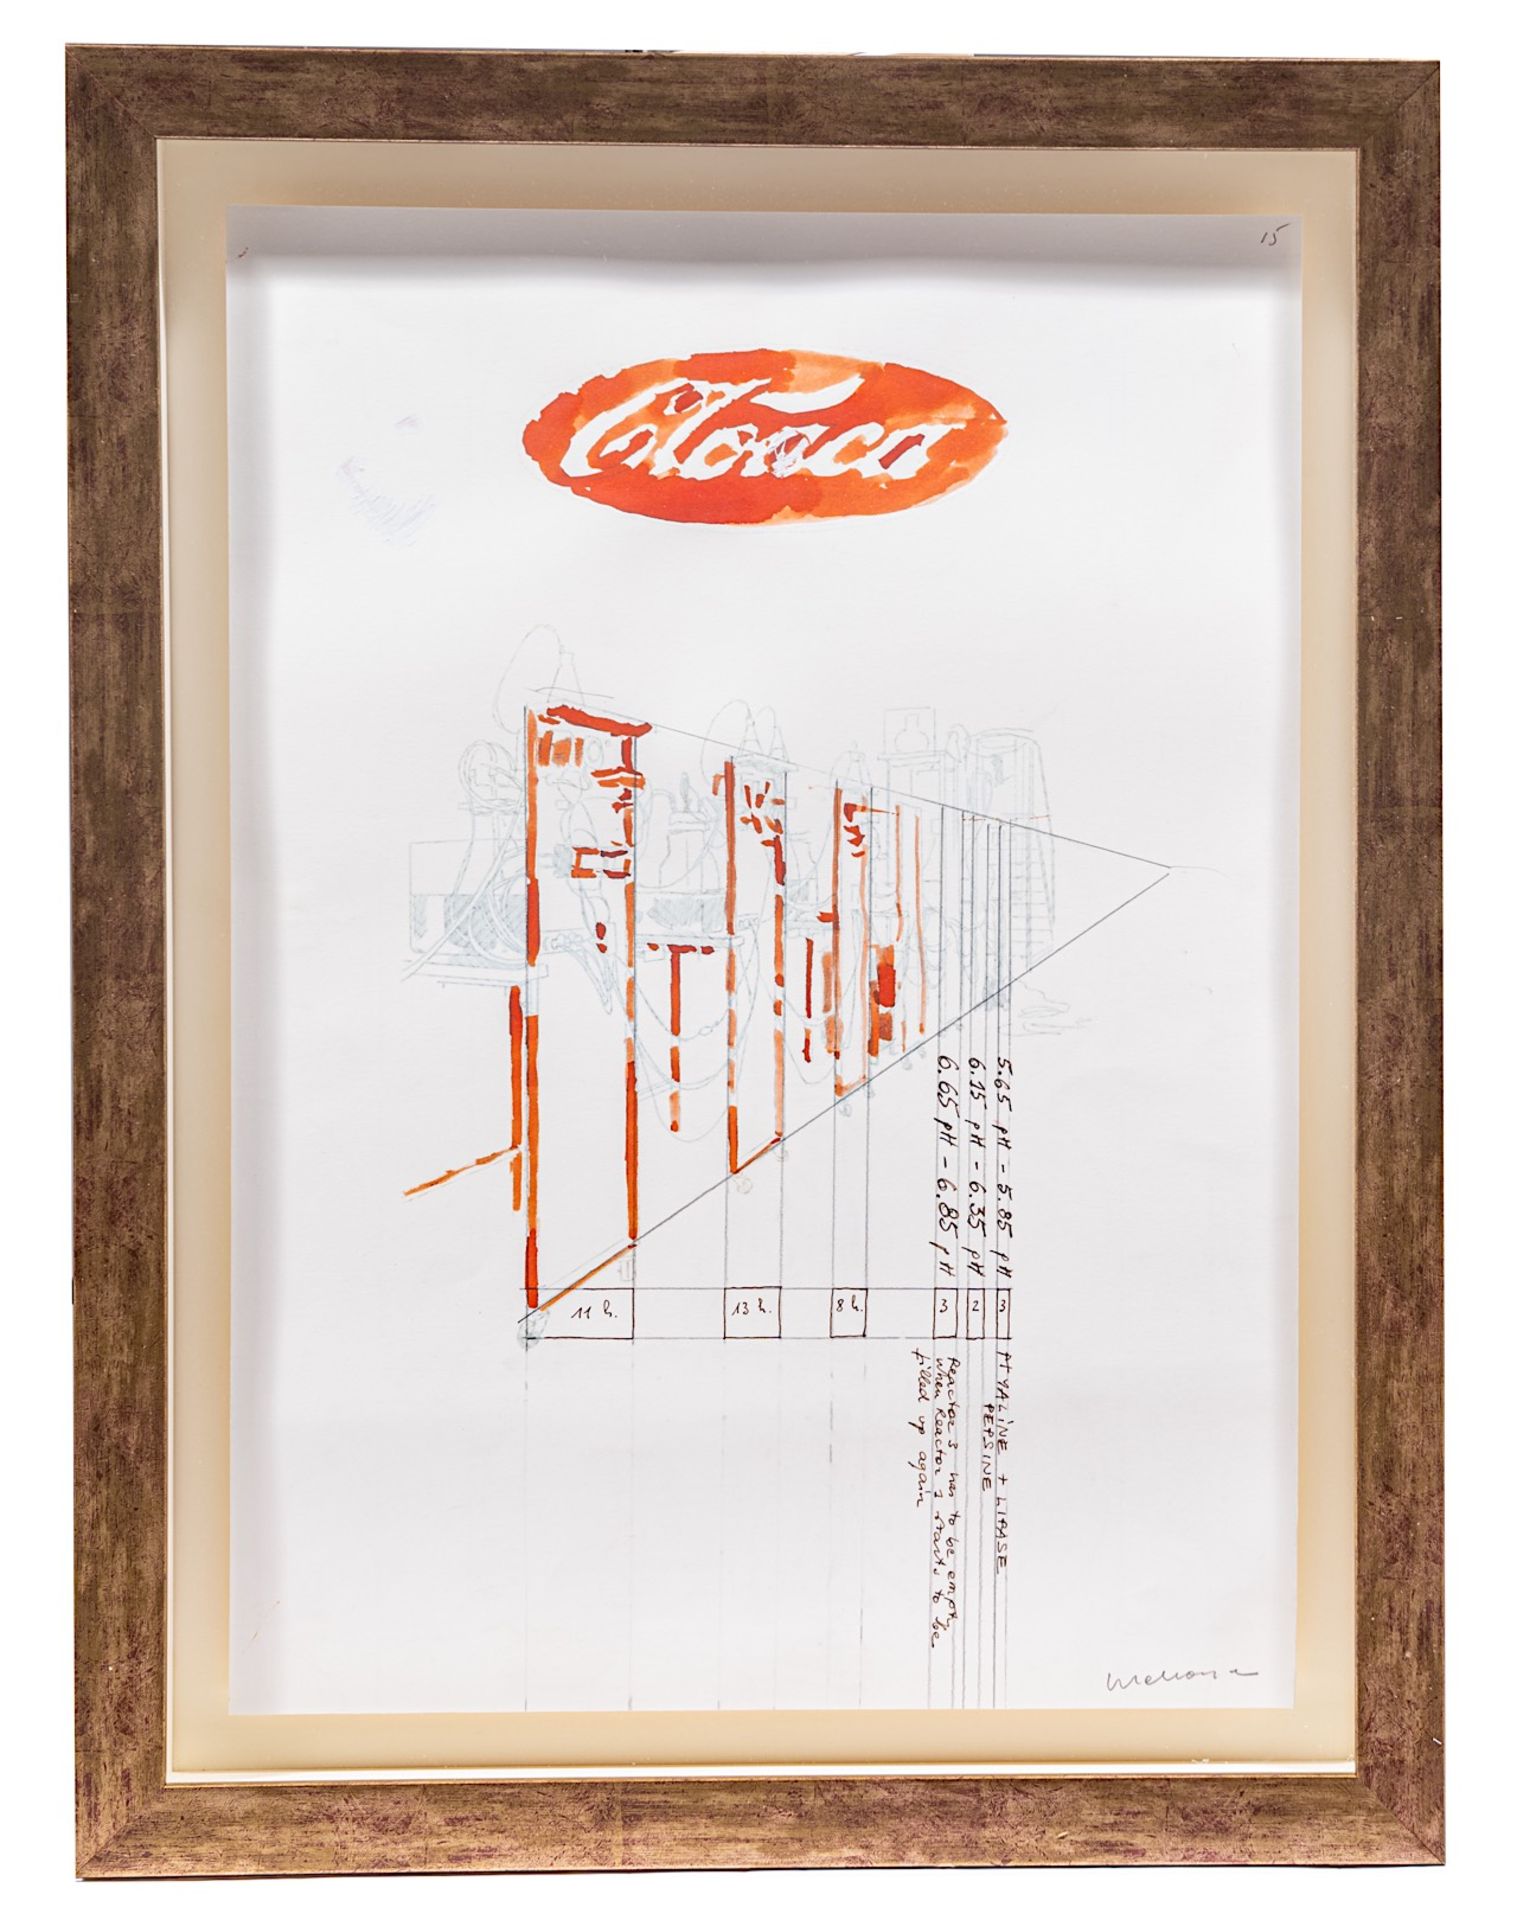 Wim Delvoye (1965), Cloaca, ink and watercolour drawing 58 x 42 cm. (22.8 x 16.5 in.), Frame: 72 x 5 - Image 2 of 6